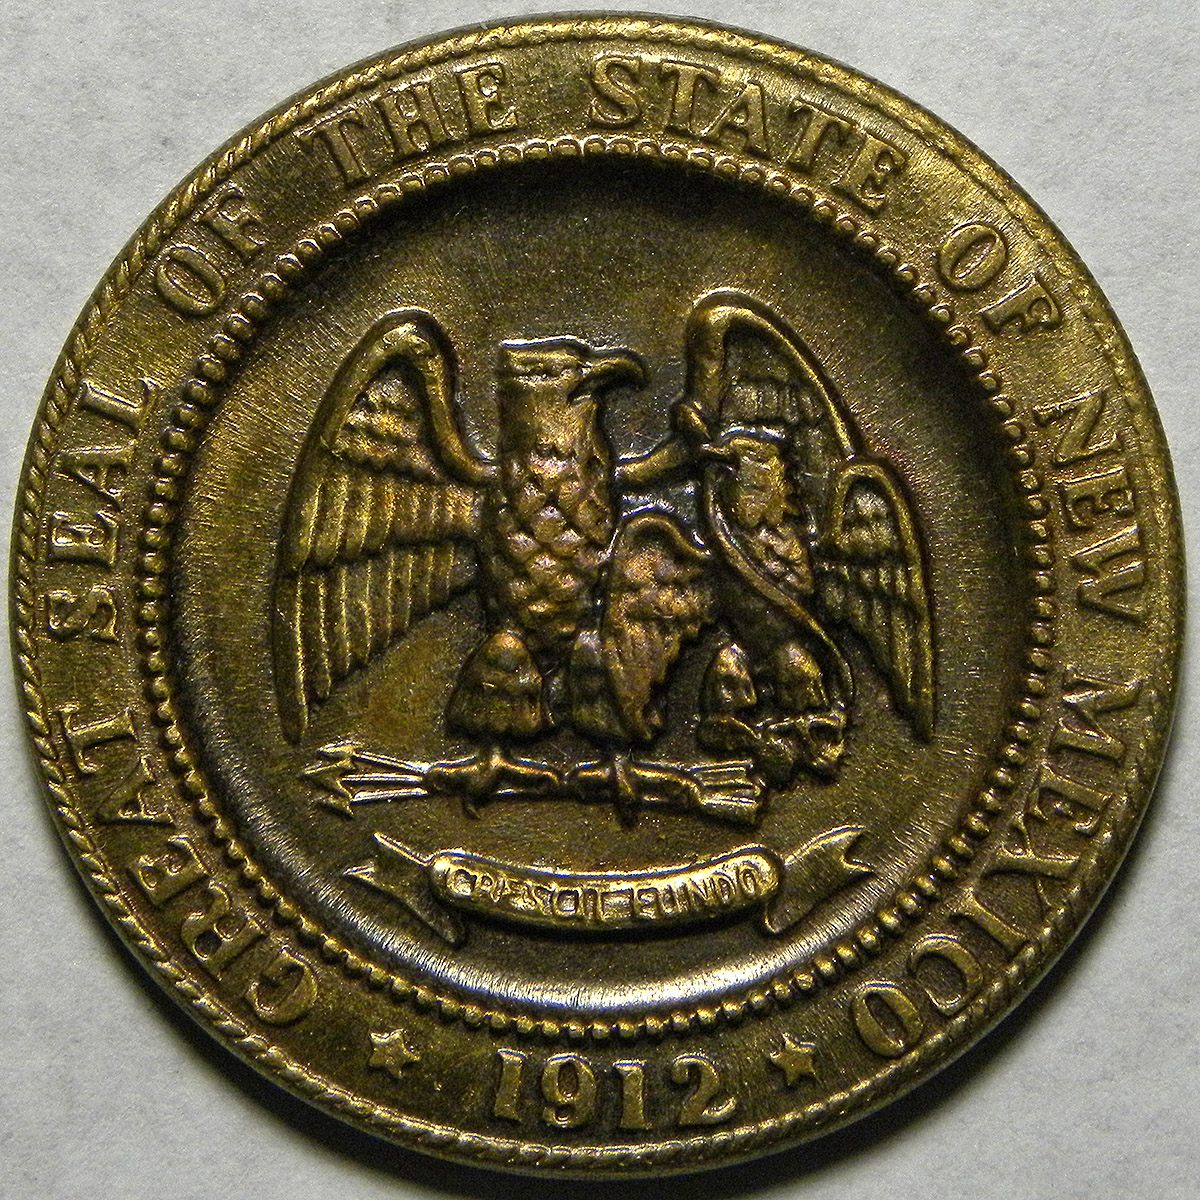 New Mexico 50th anniversary of statehood (1912-1962) medal (reverse)